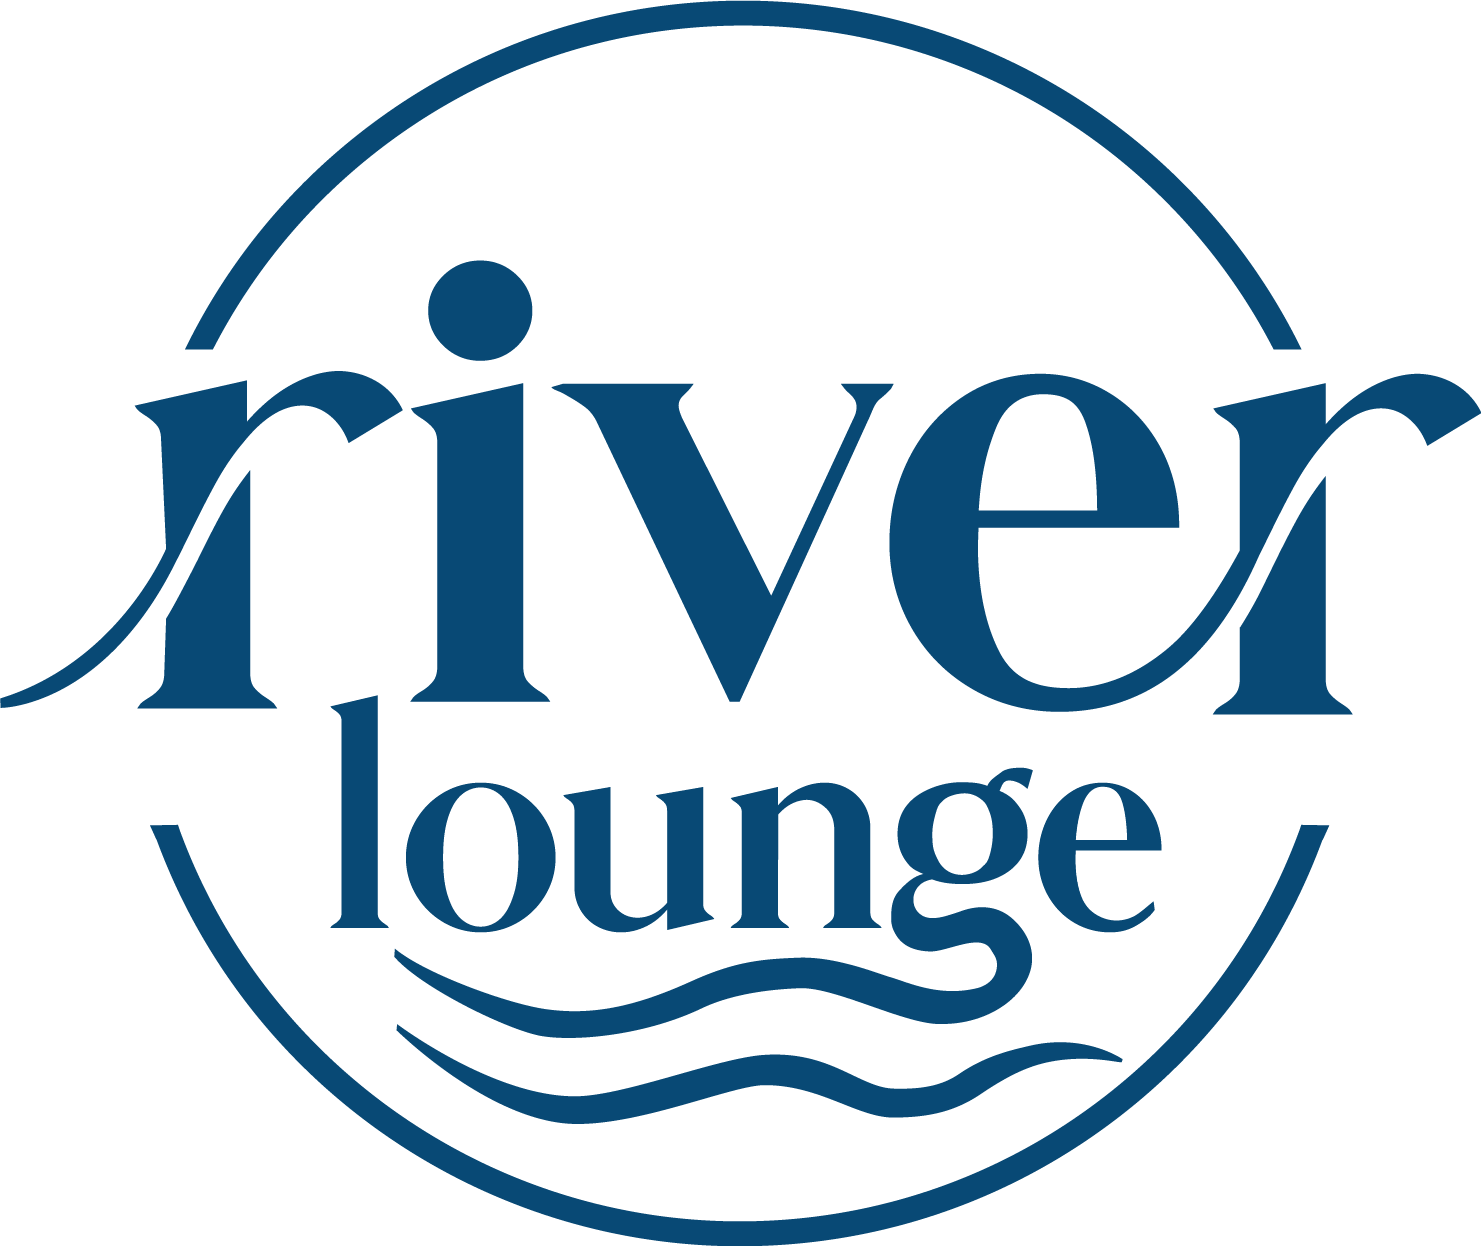 The River Lounge